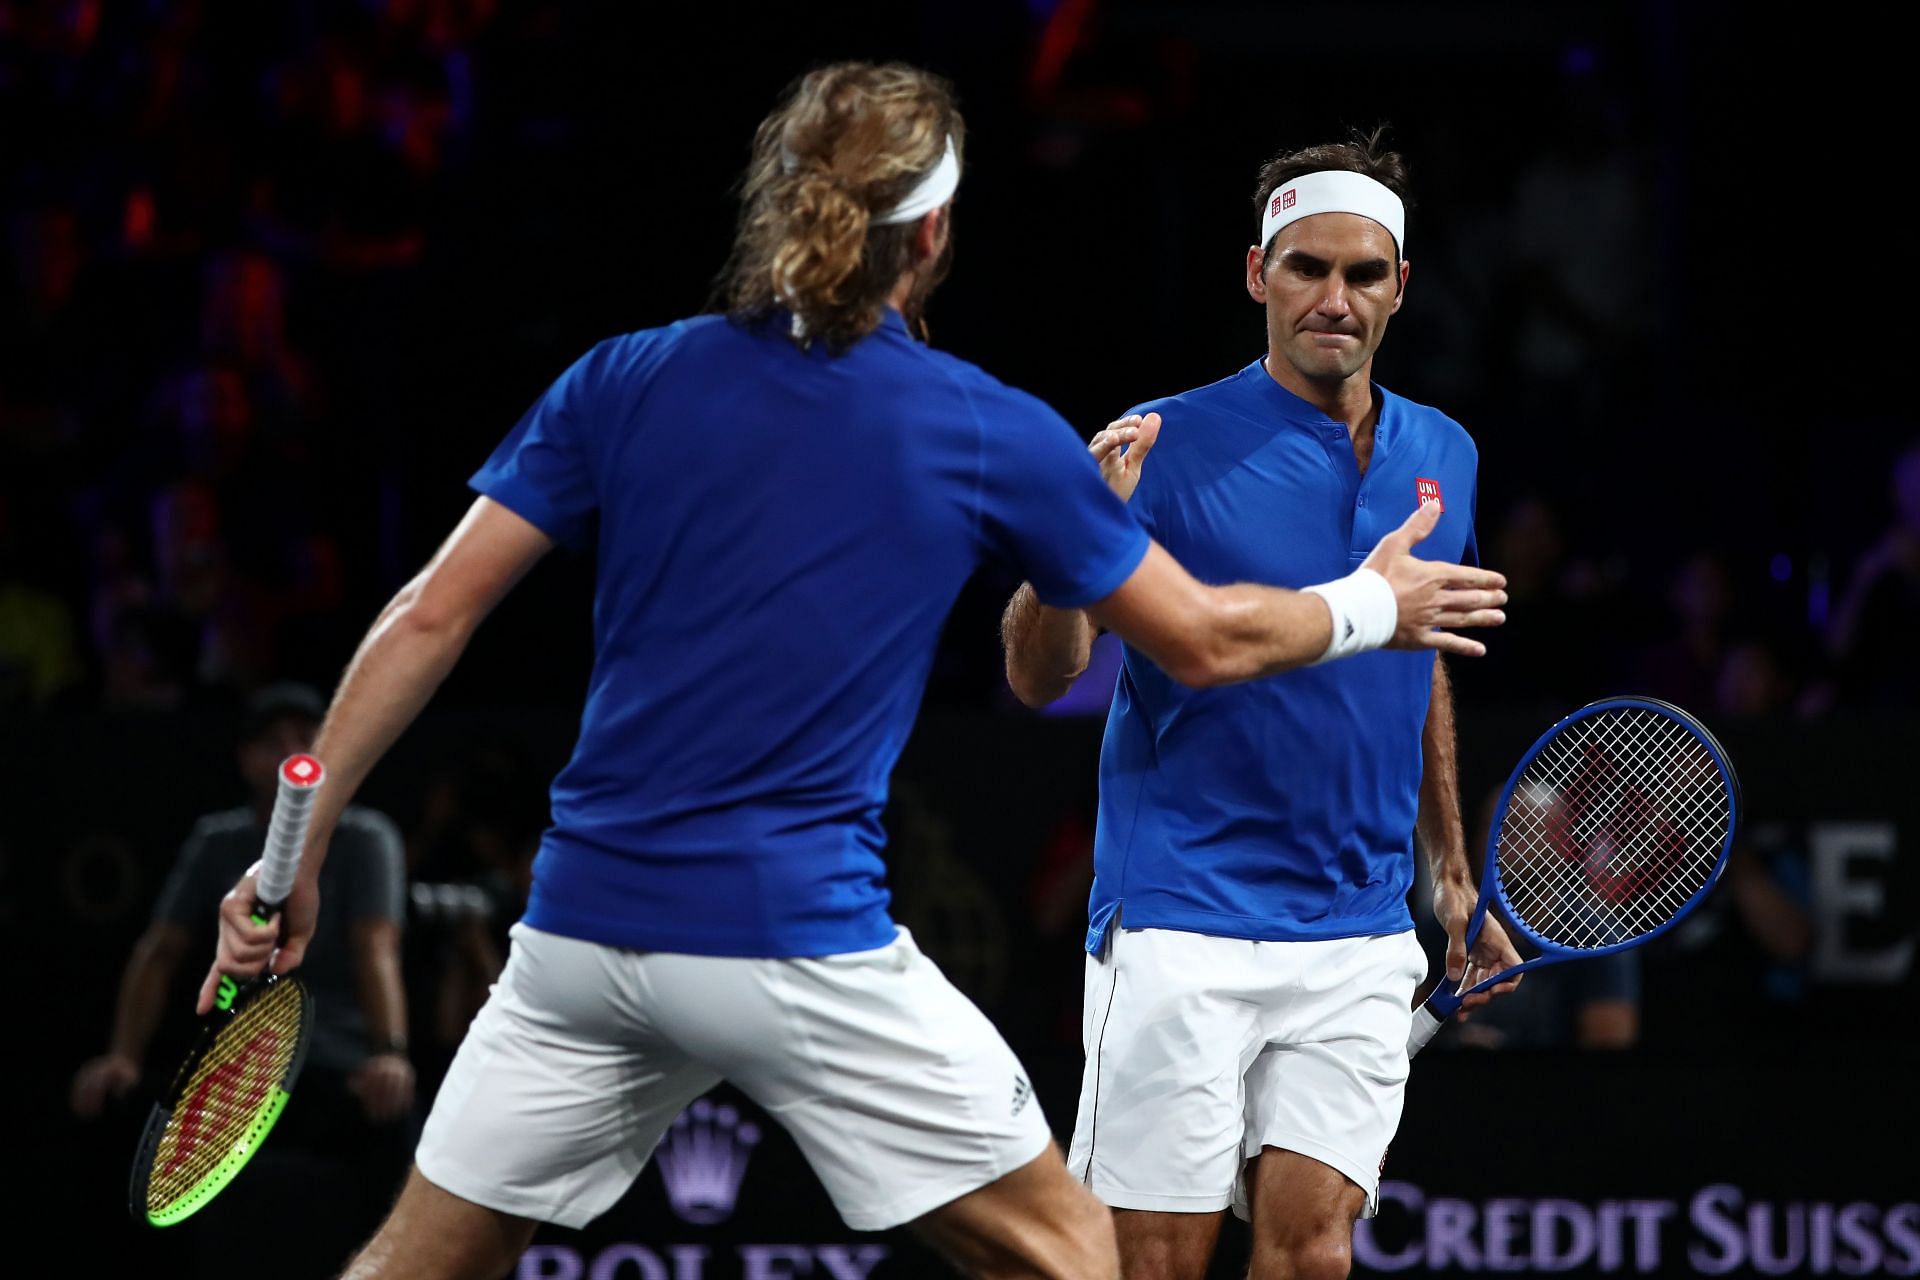 Laver Cup 2019 - Day 3